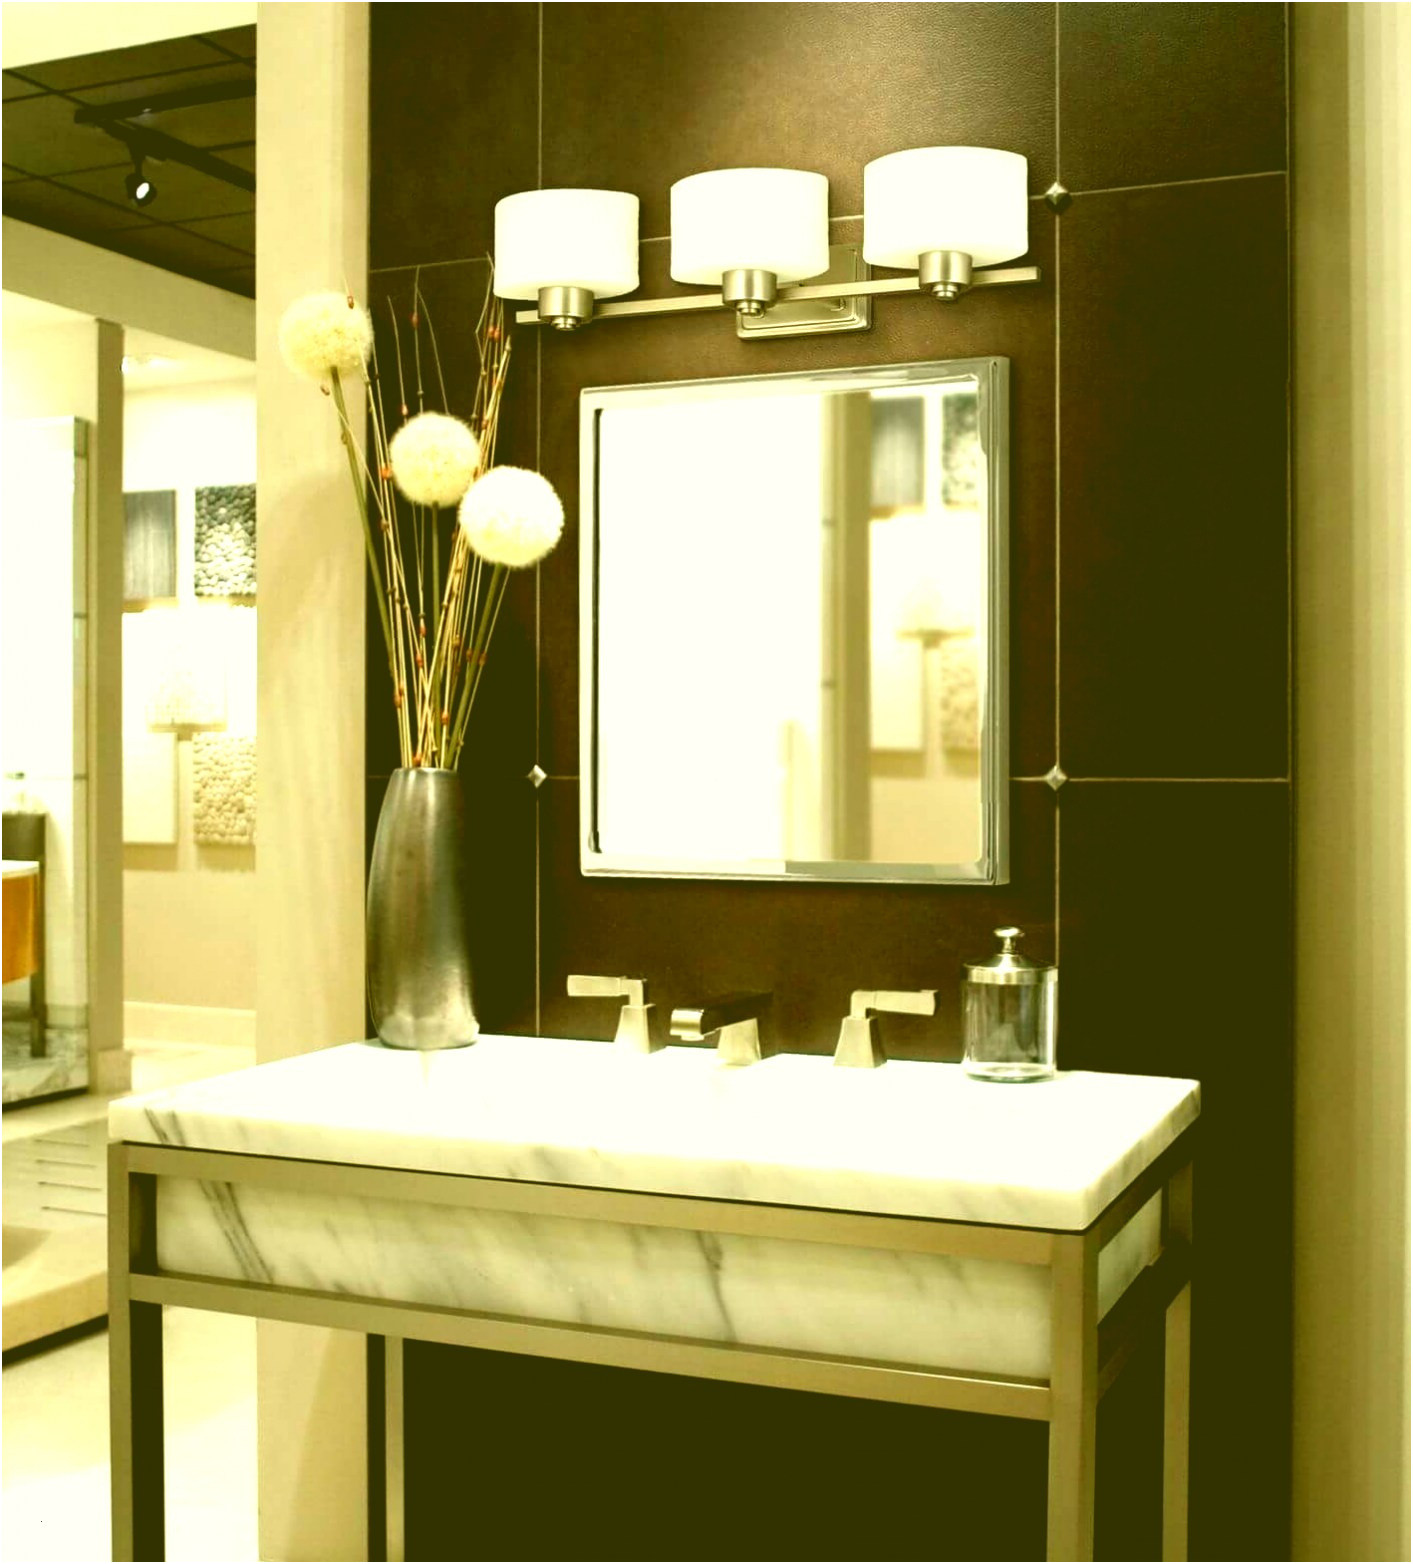 Bathroom Mirror with Lights Argos Awesome Bathroom Mirror with Lights Argos Bathroom Design Ideas